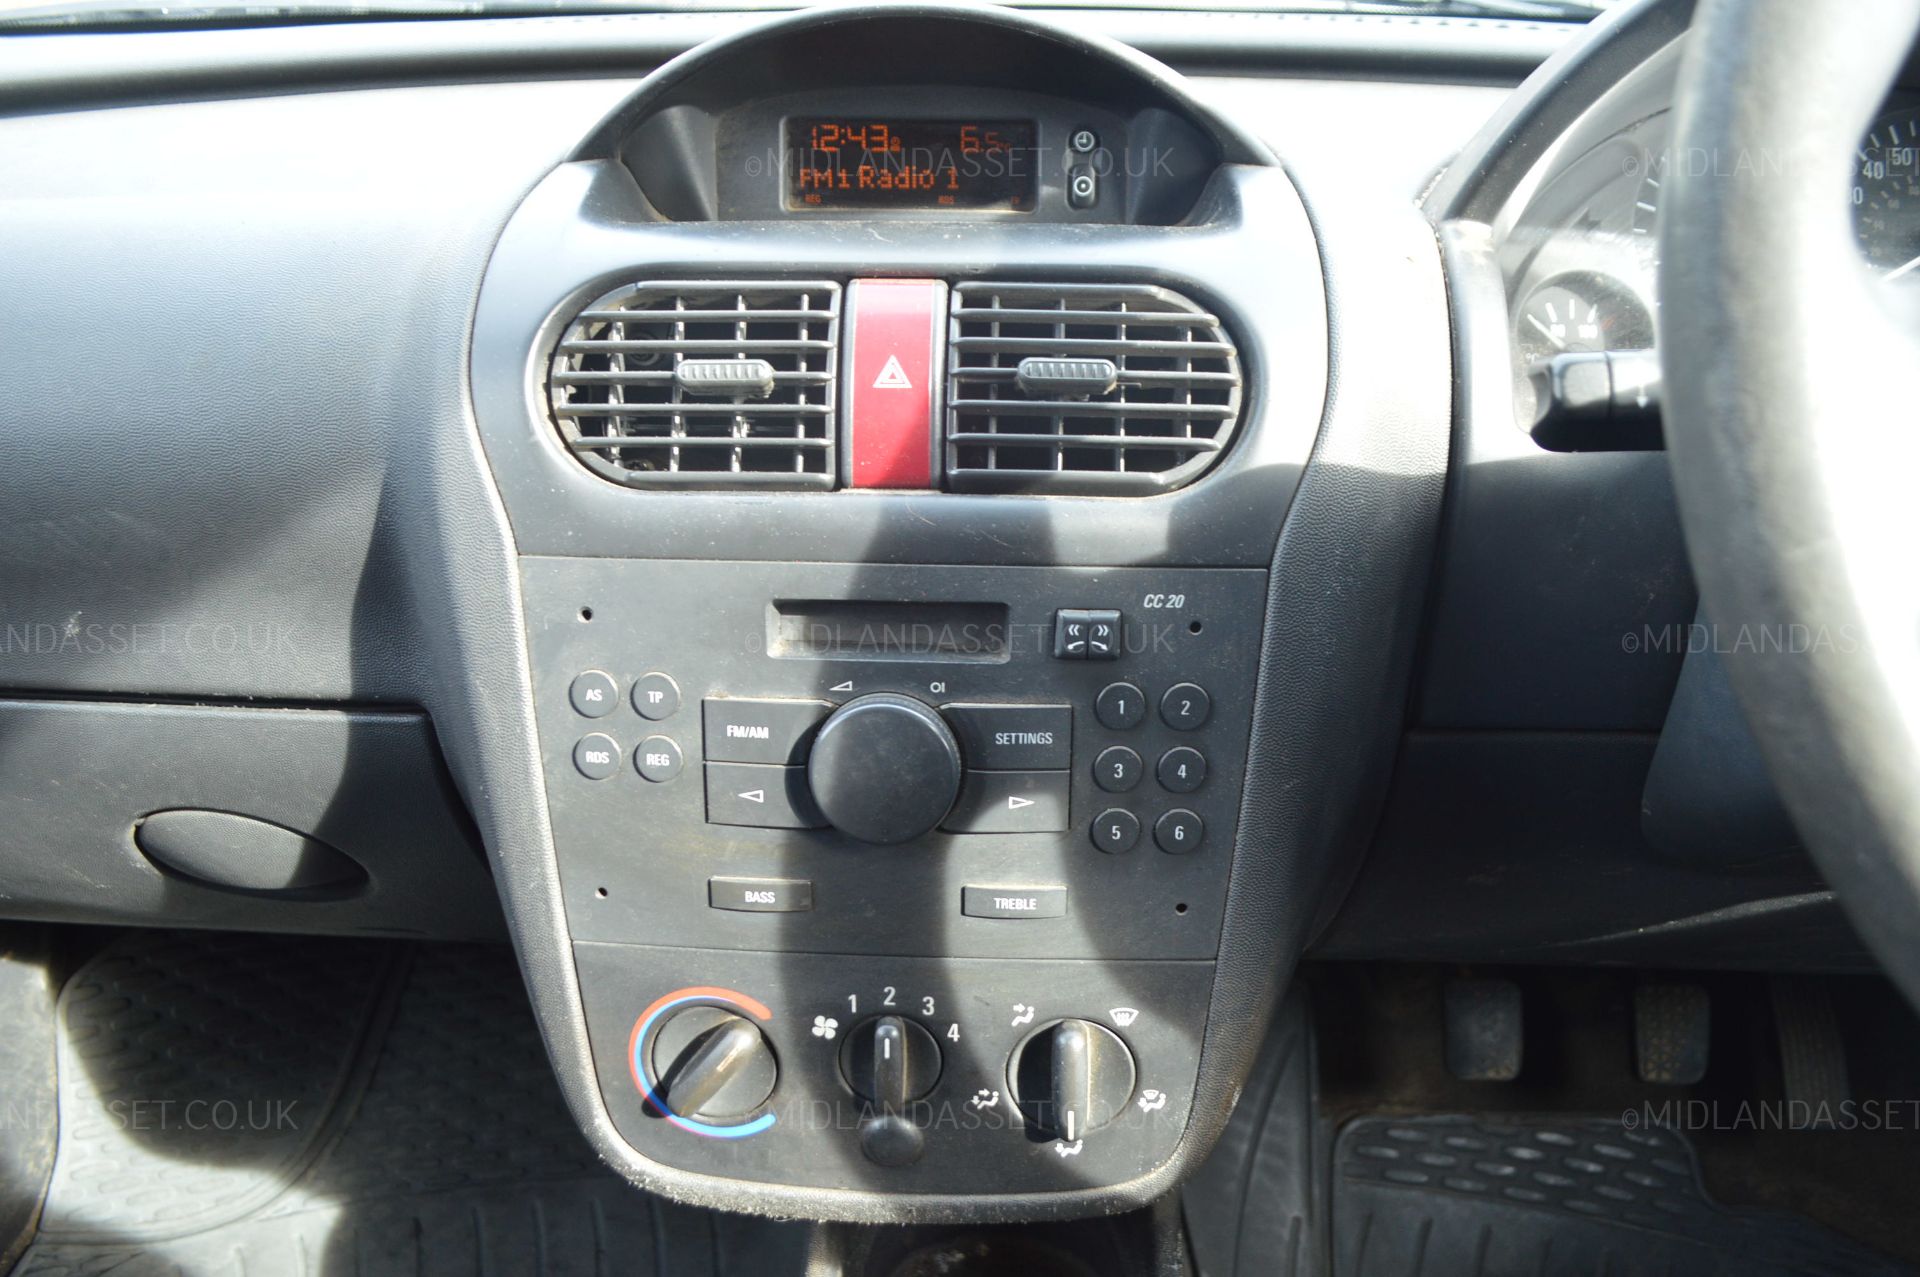 KB - 2008/58 REG VAUXHALL COMBO 1700 CDTI - 1 PREVIOUS OWNER, ROYAL MAIL *NO VAT*   DATE OF - Image 19 of 19